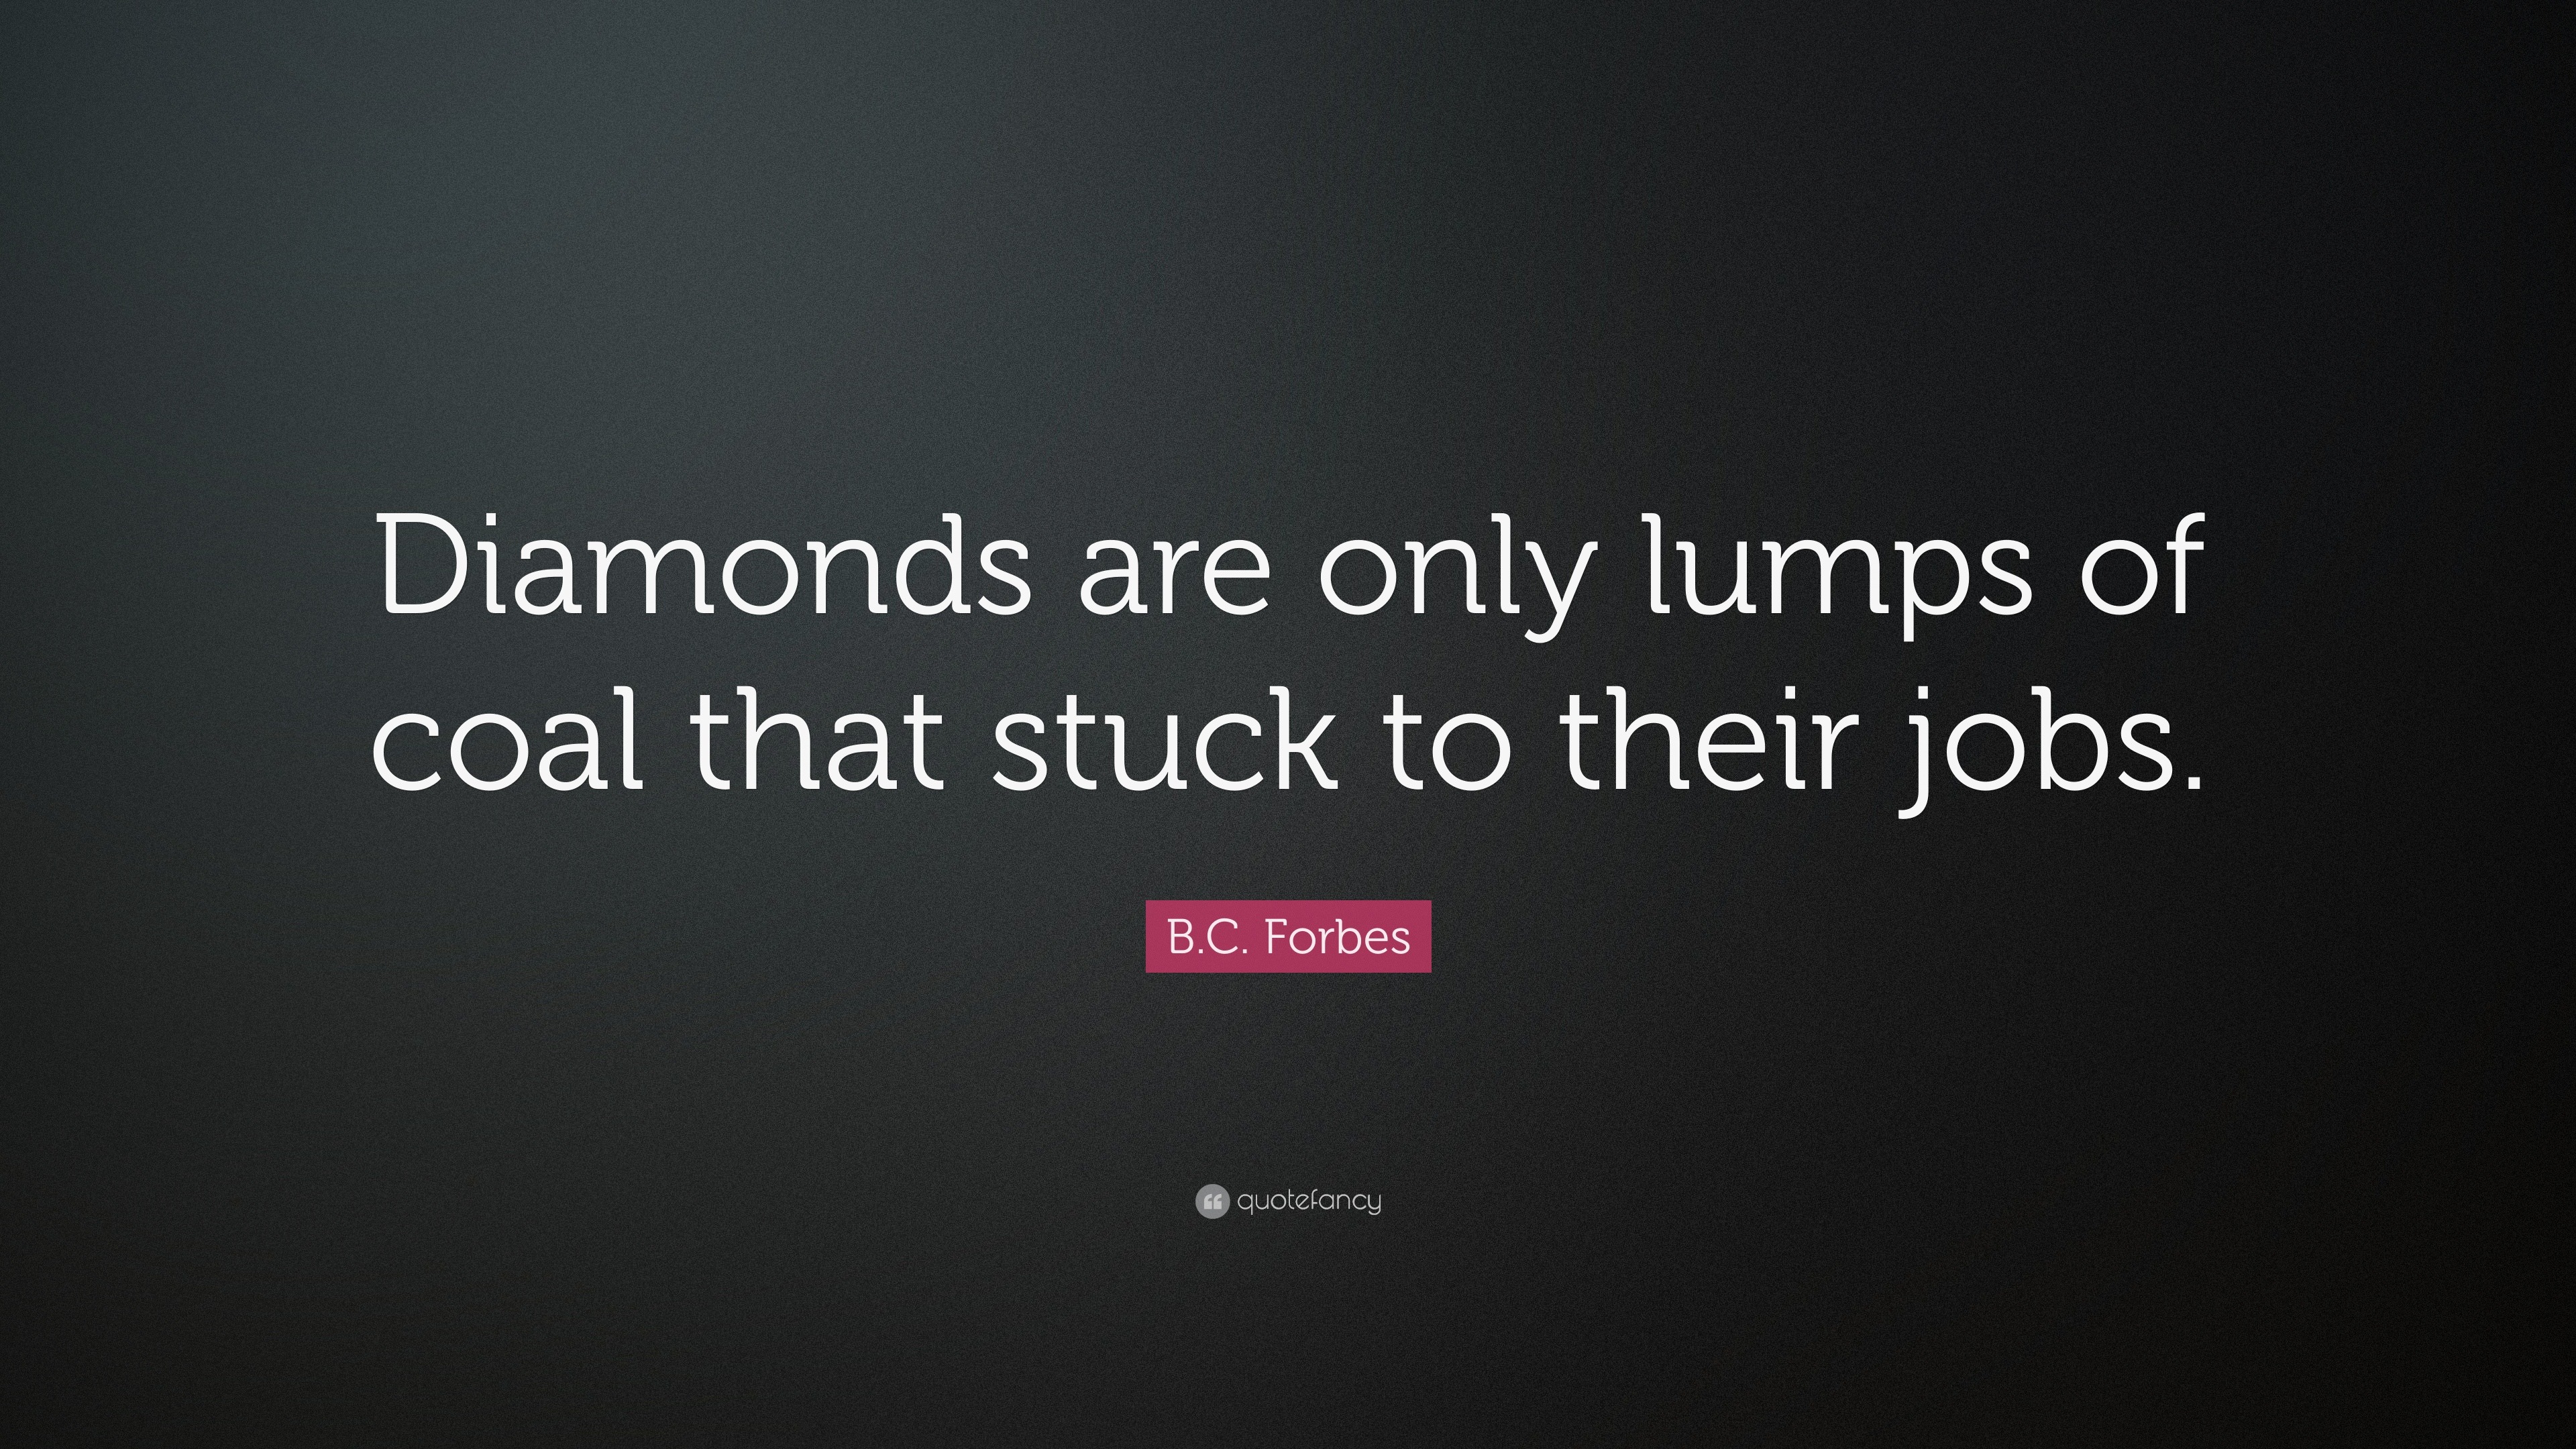 B.C. Forbes Quote: “Diamonds are only